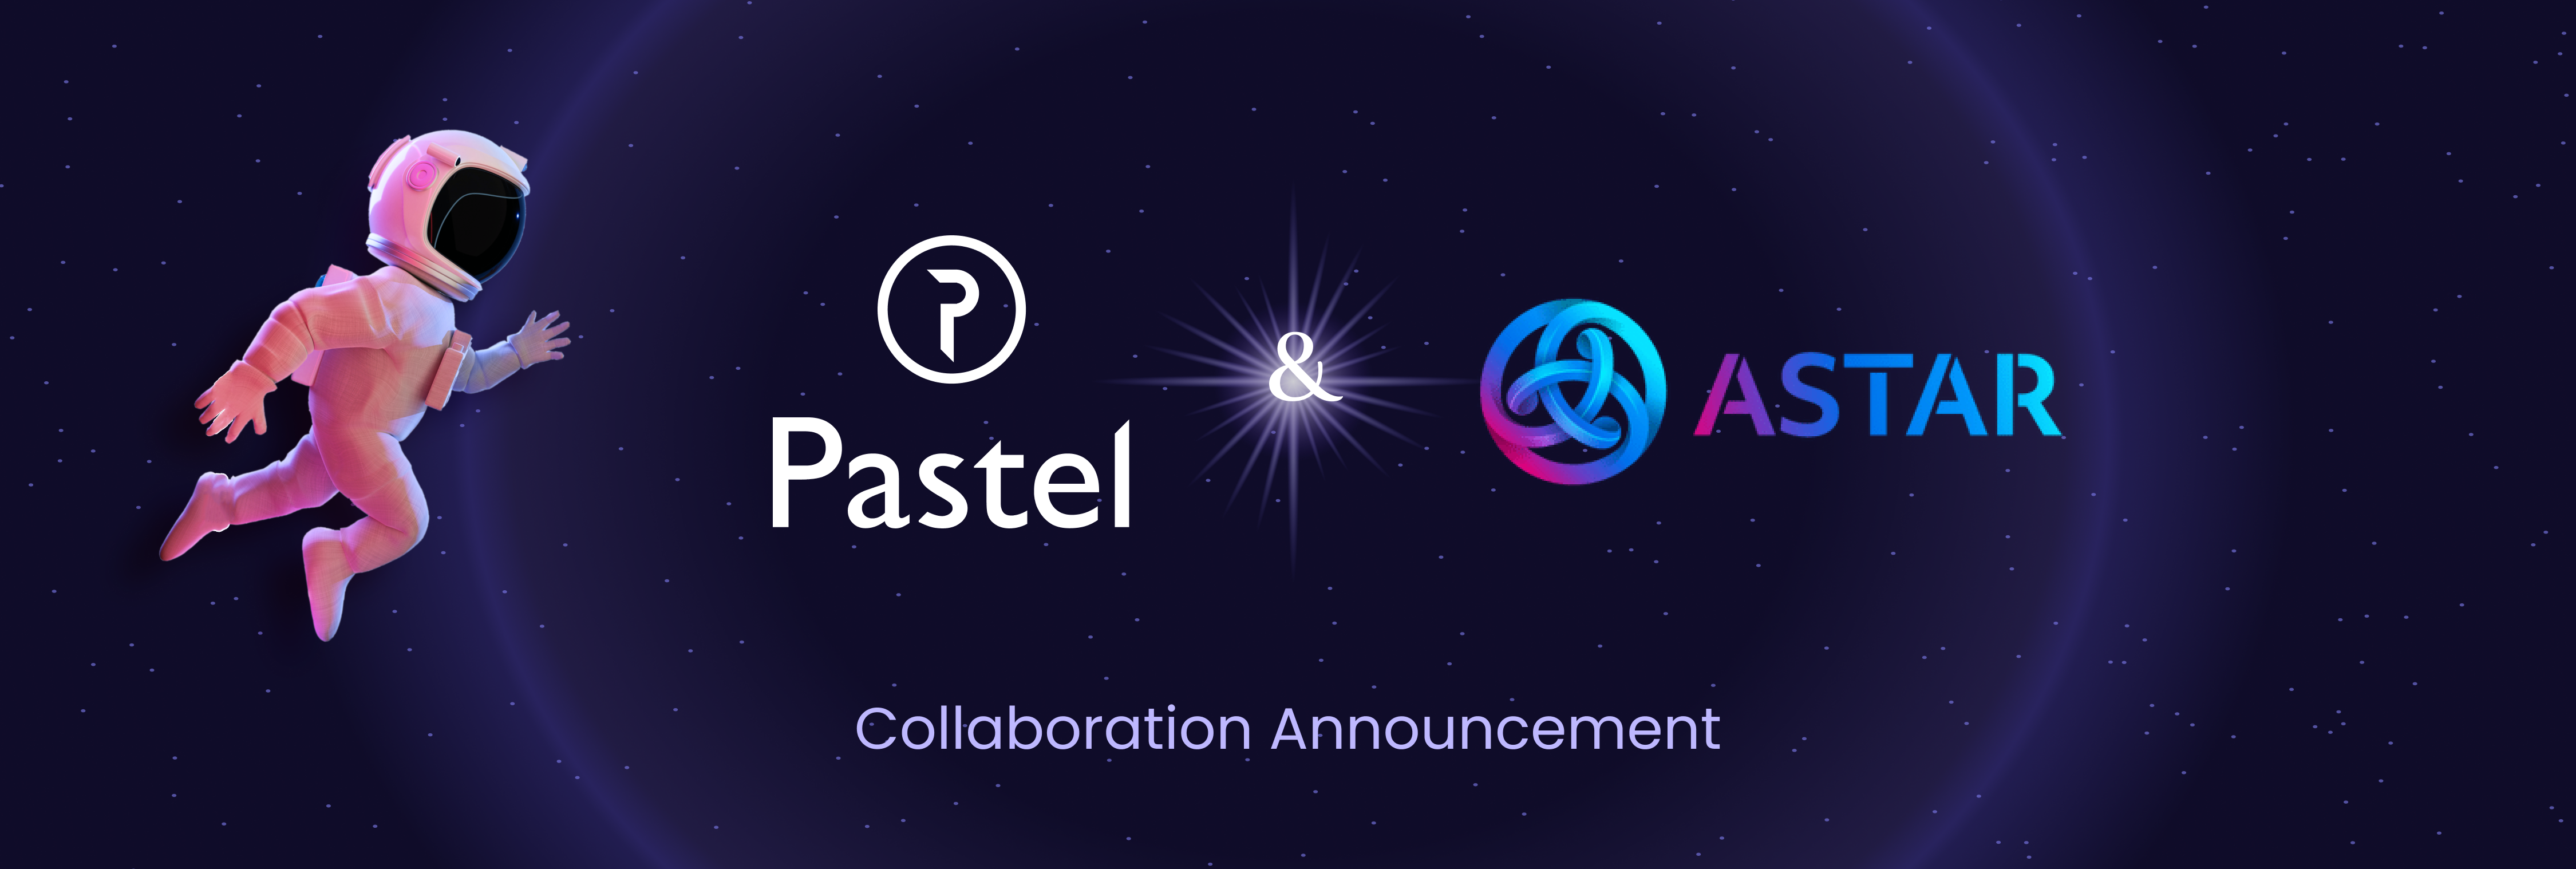 Pastel Network is teaming up with Astar to bring NFT security and NFT data permanence to the Web3 Ecosystem